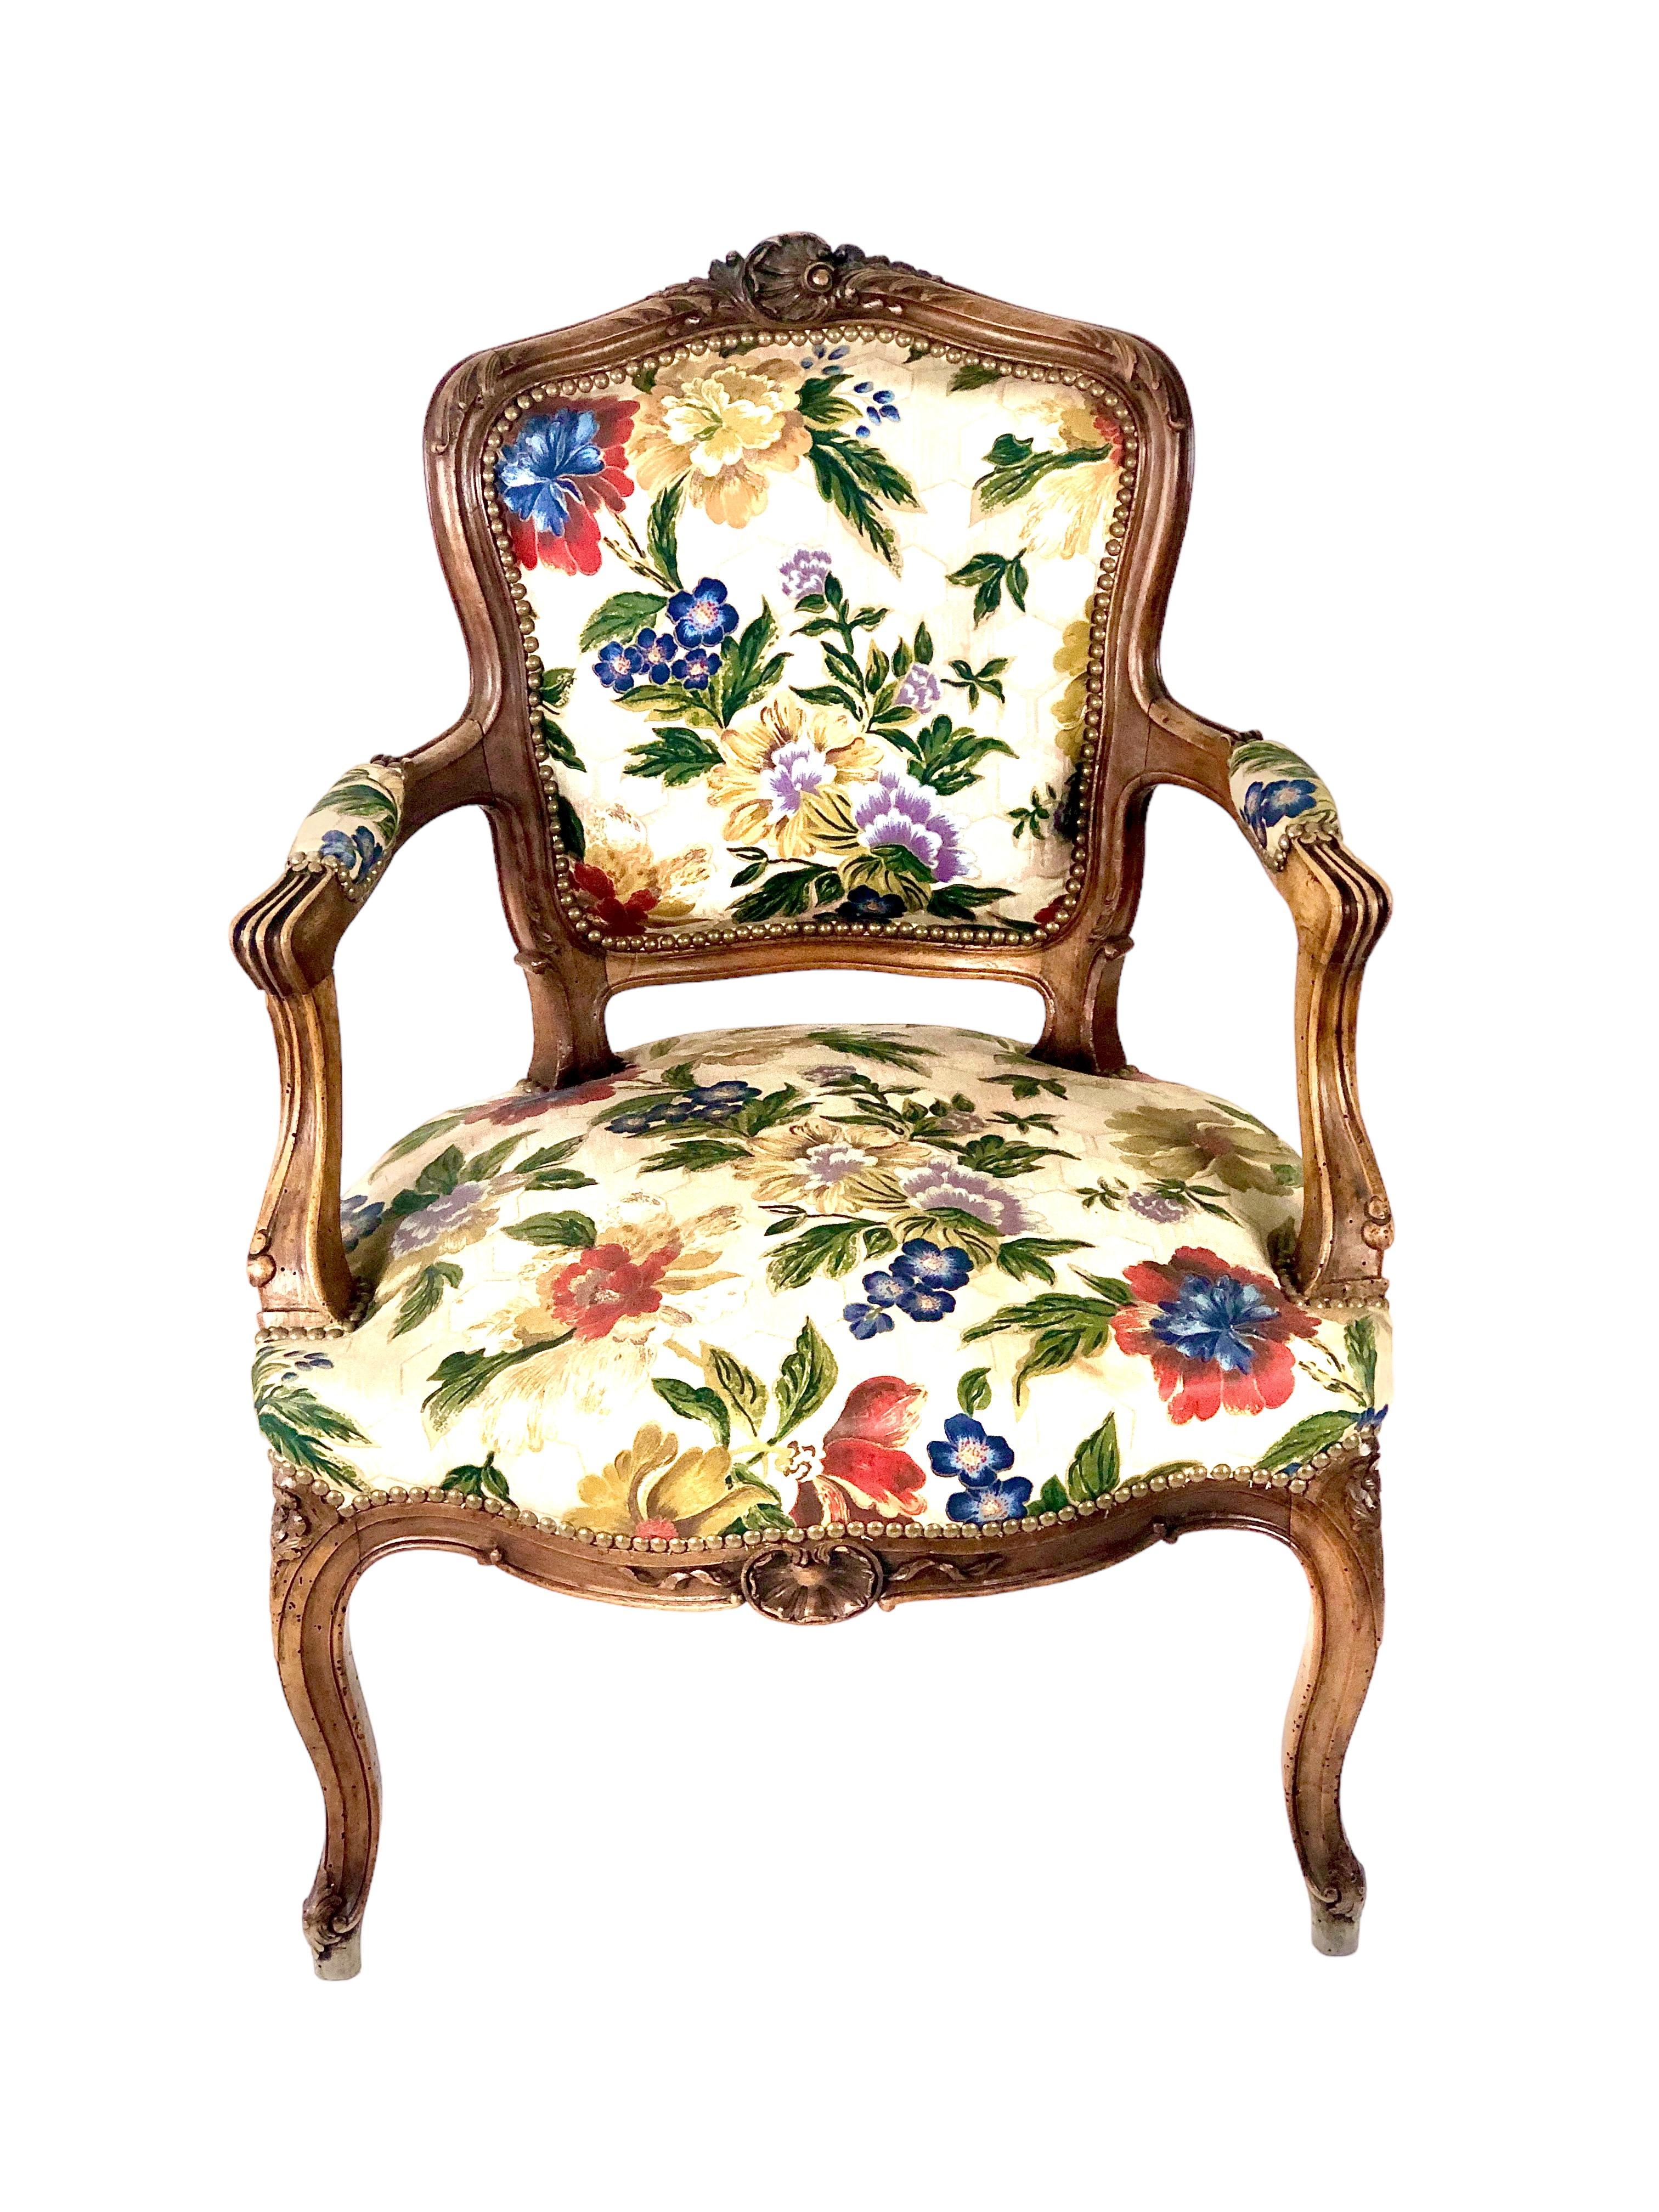 A pair of late 19th century Louis XV style, solid walnut, French cabriolets armchairs (Fauteuils Cabriolets), upholstered in a gorgeous fabric. The generous, wide proportions of these elegantly carved and moulded elegant armchairs were designed to